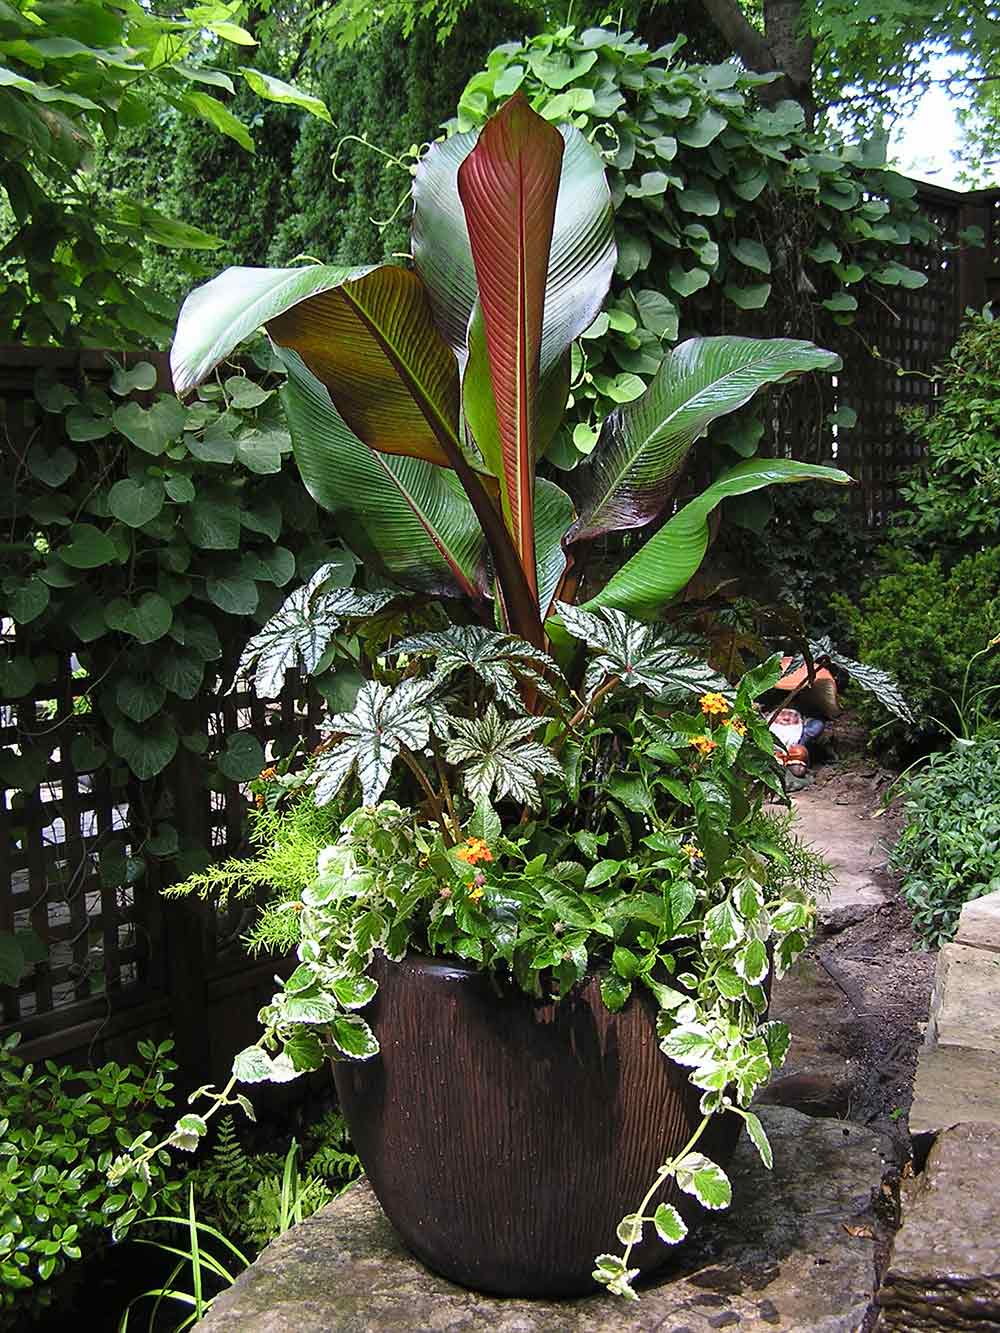 A large round brown planter with container plants that are twice the height of the planter.